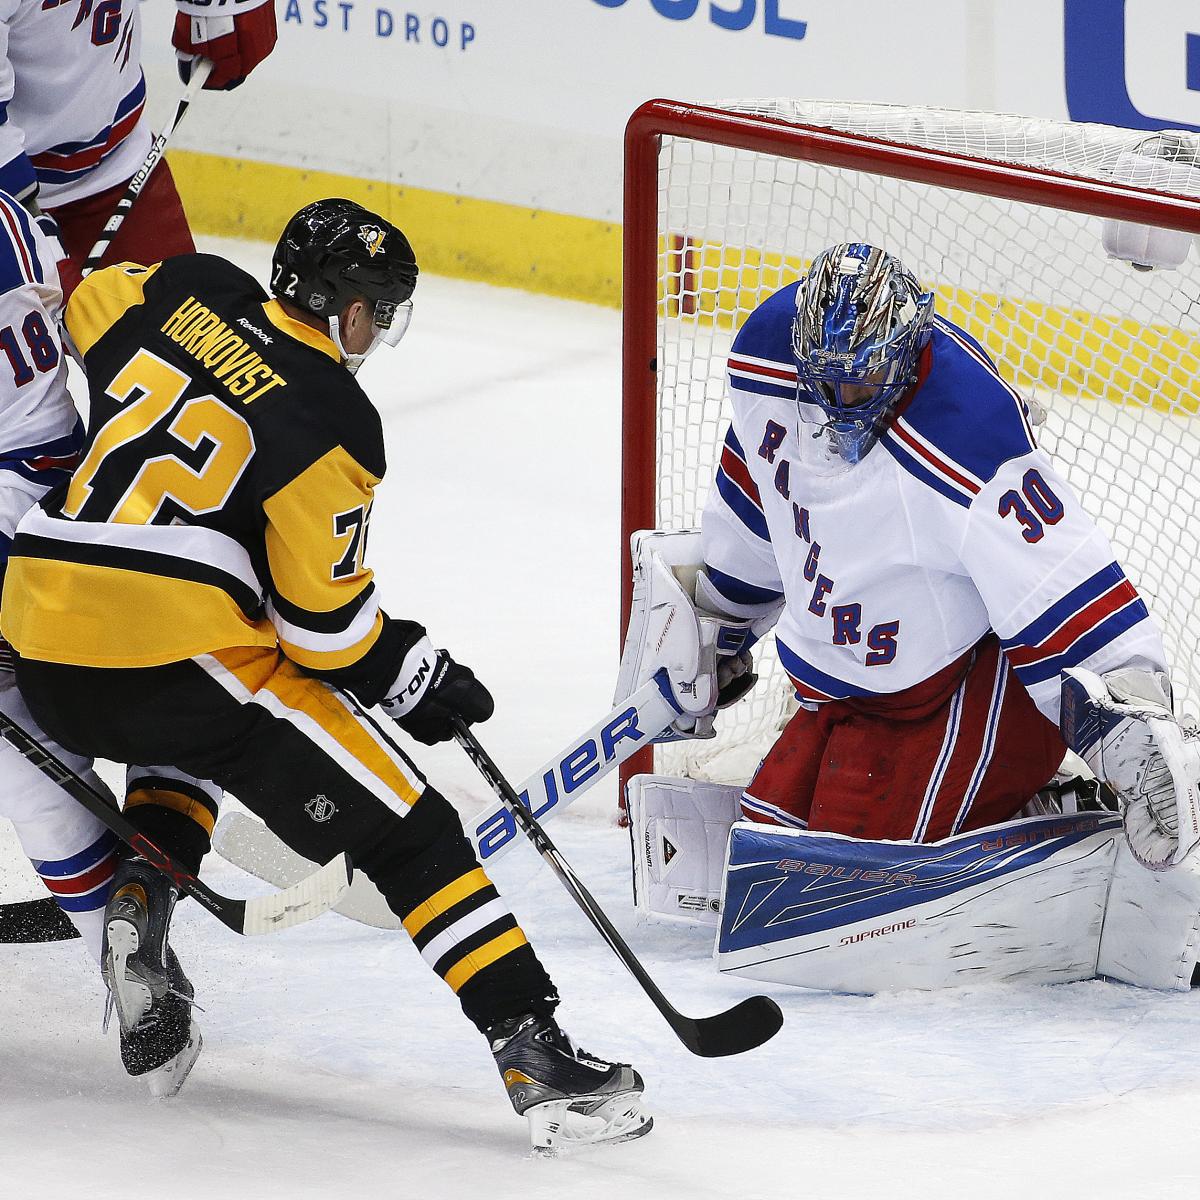 Rangers vs. Penguins Game 1 Score and Twitter Reaction from 2016 NHL